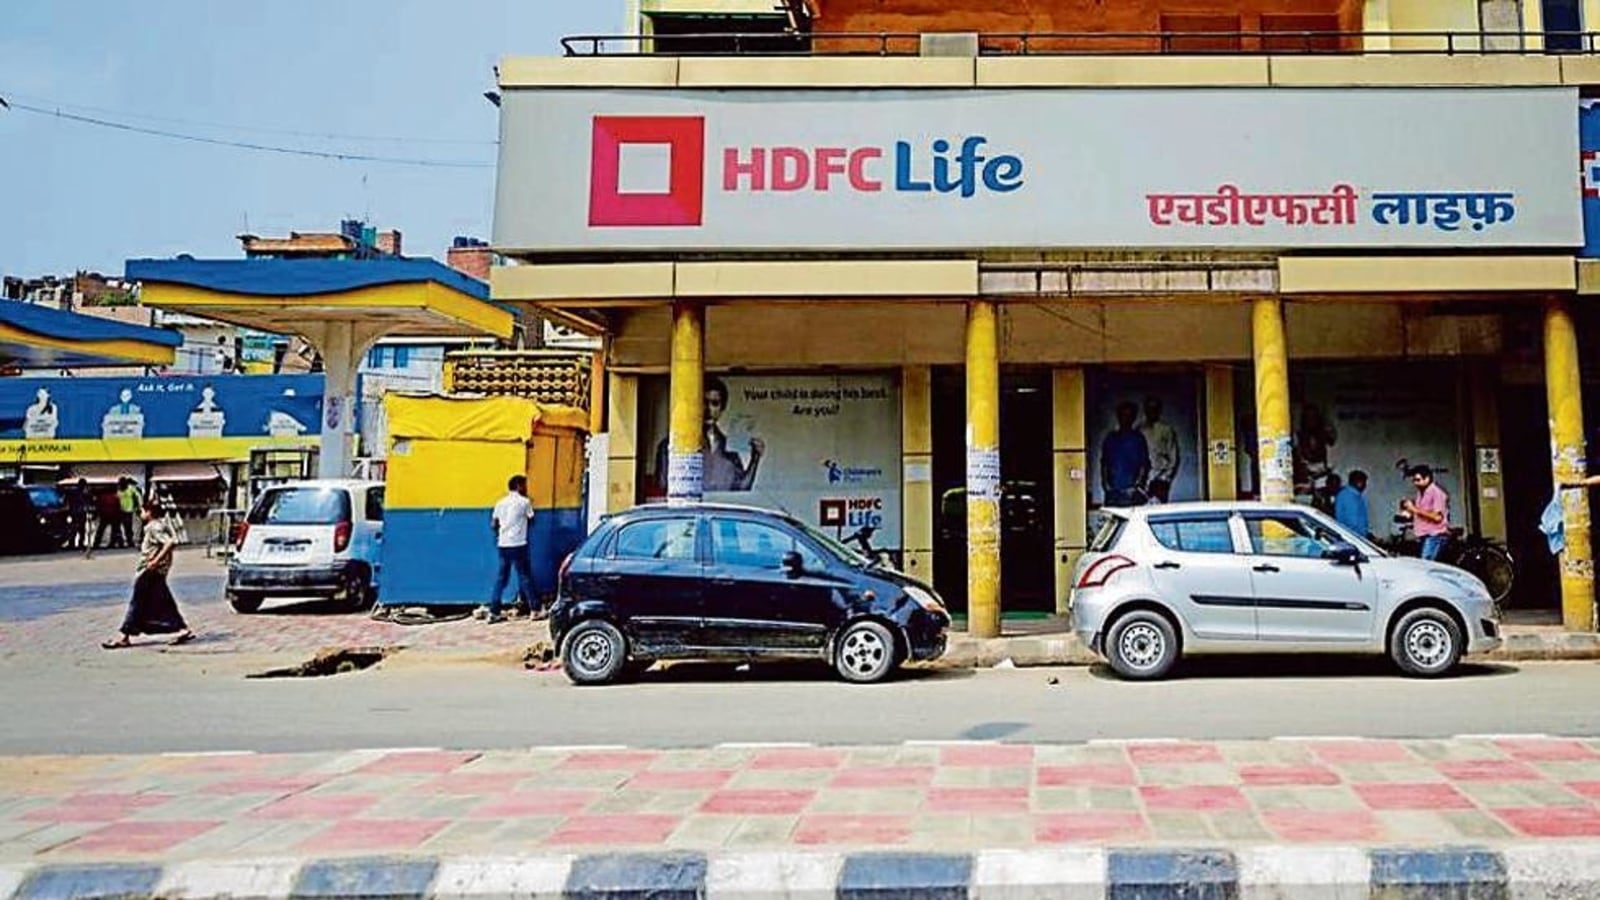 Hdfc Life Buys Exide Life Insurance For ₹6687 Crore Hindustan Times 6822